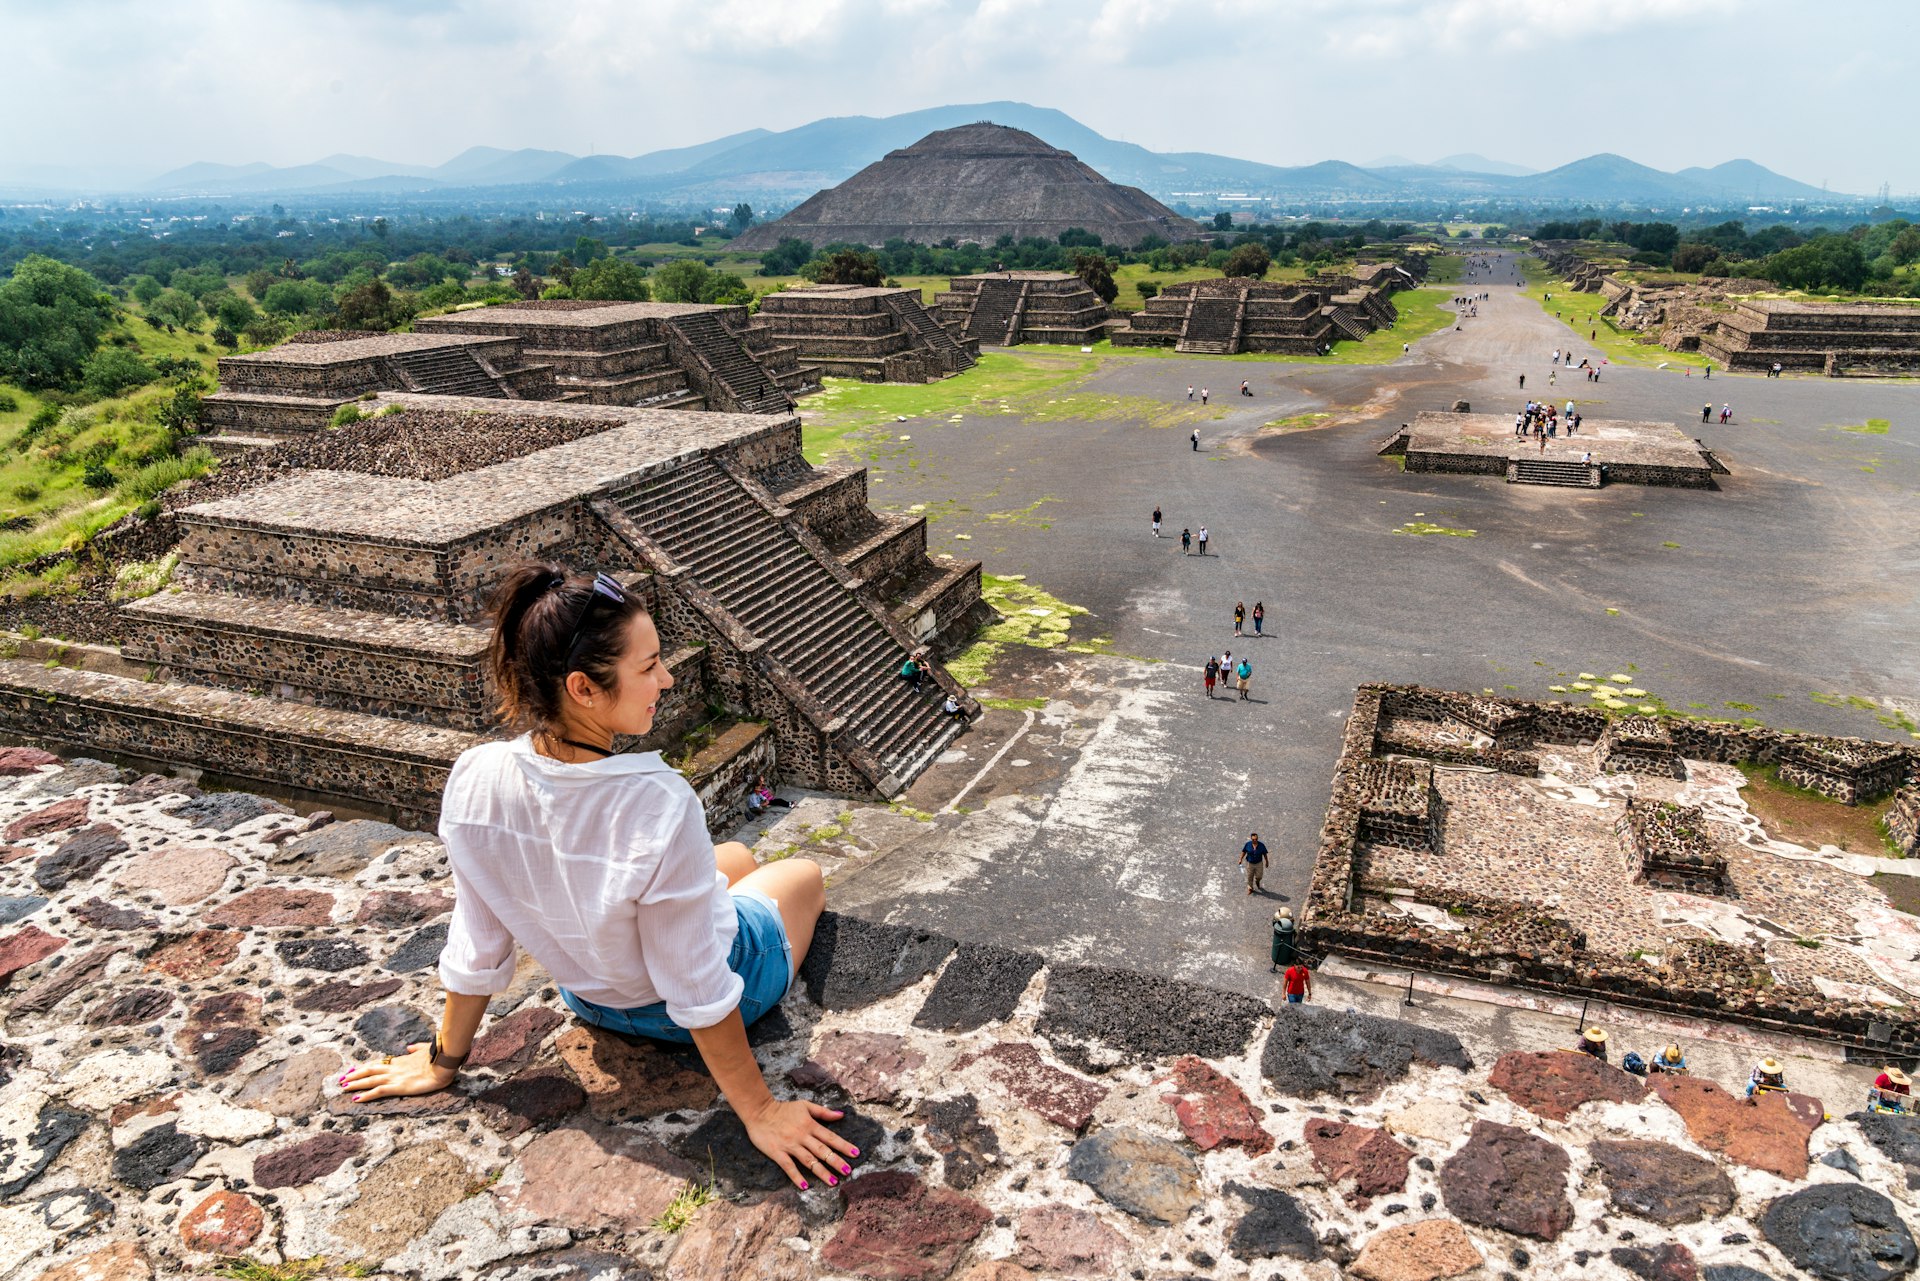 A woman sits on top of a pyramid at the ancient site of Teotihuacán, Mexico